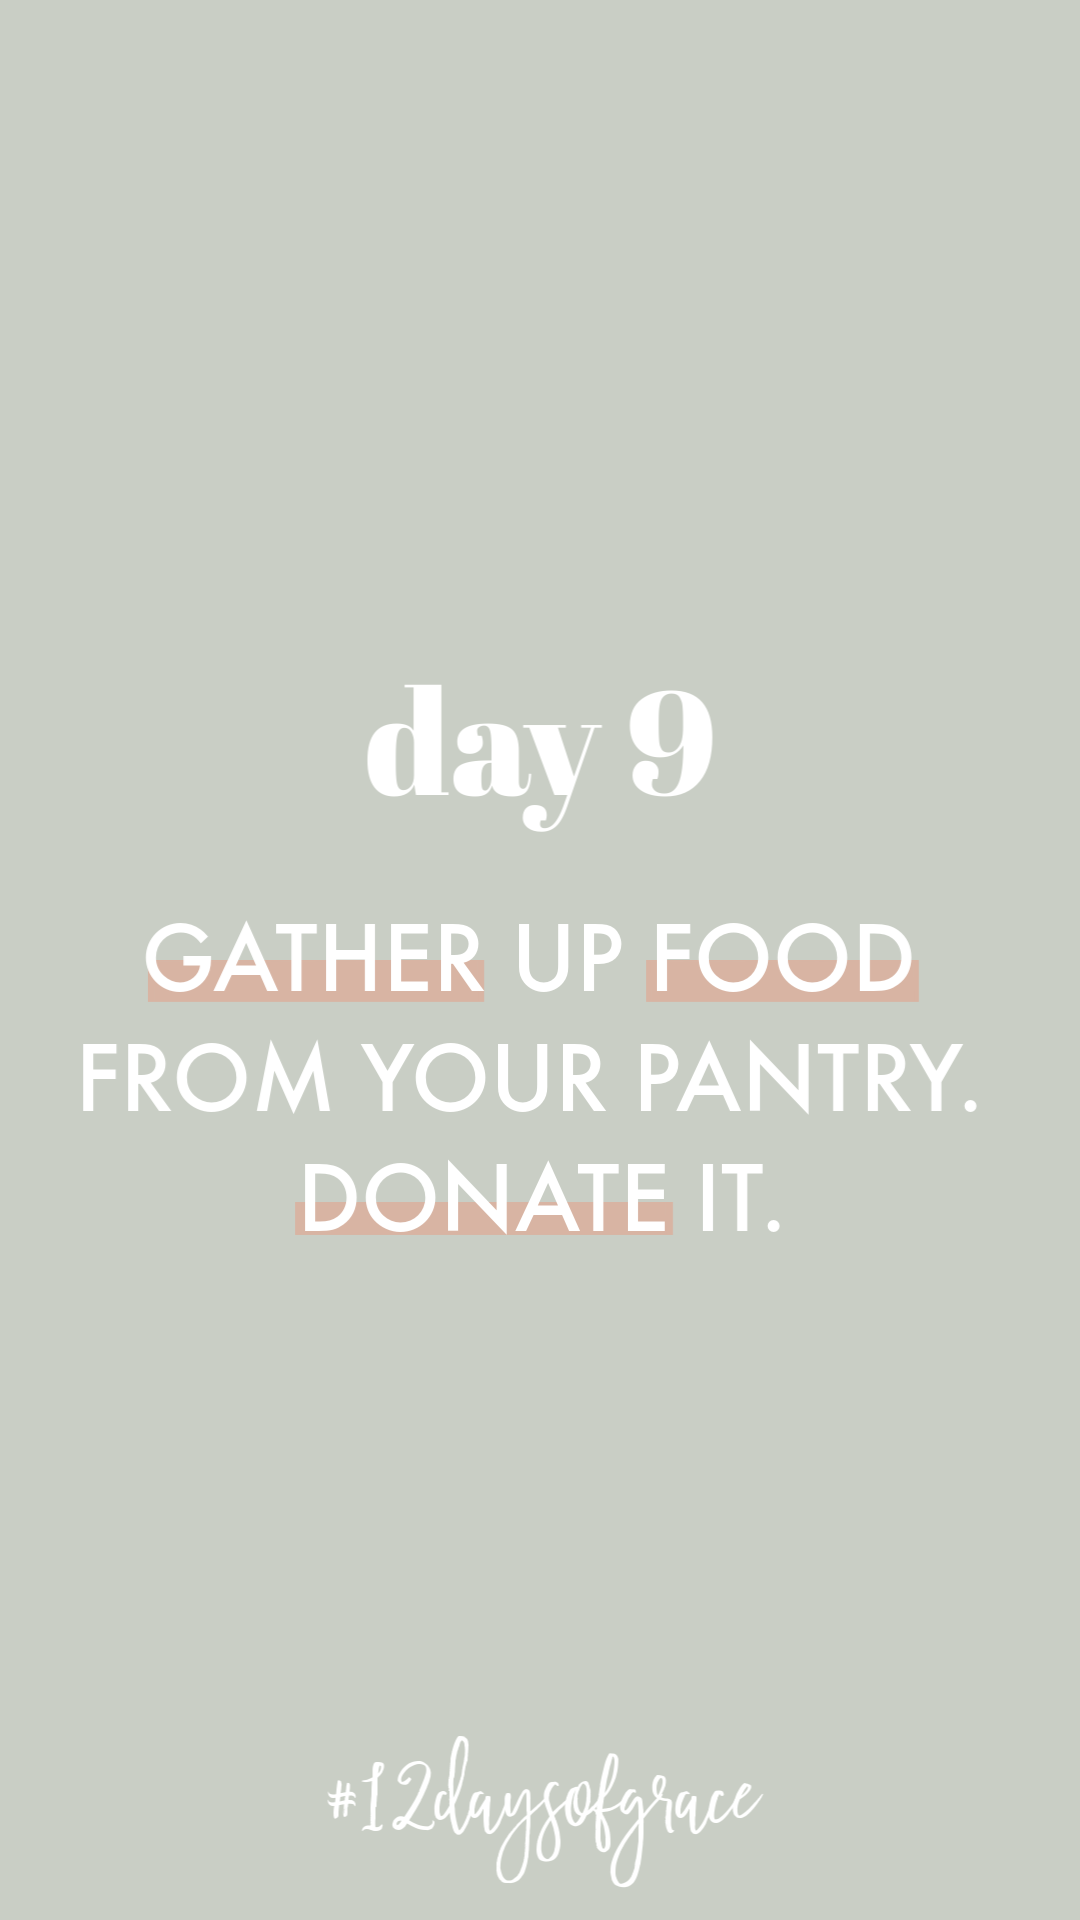 Day 9 Challenge of #12DaysofGrace. Donate food. #advent #grace #christmas